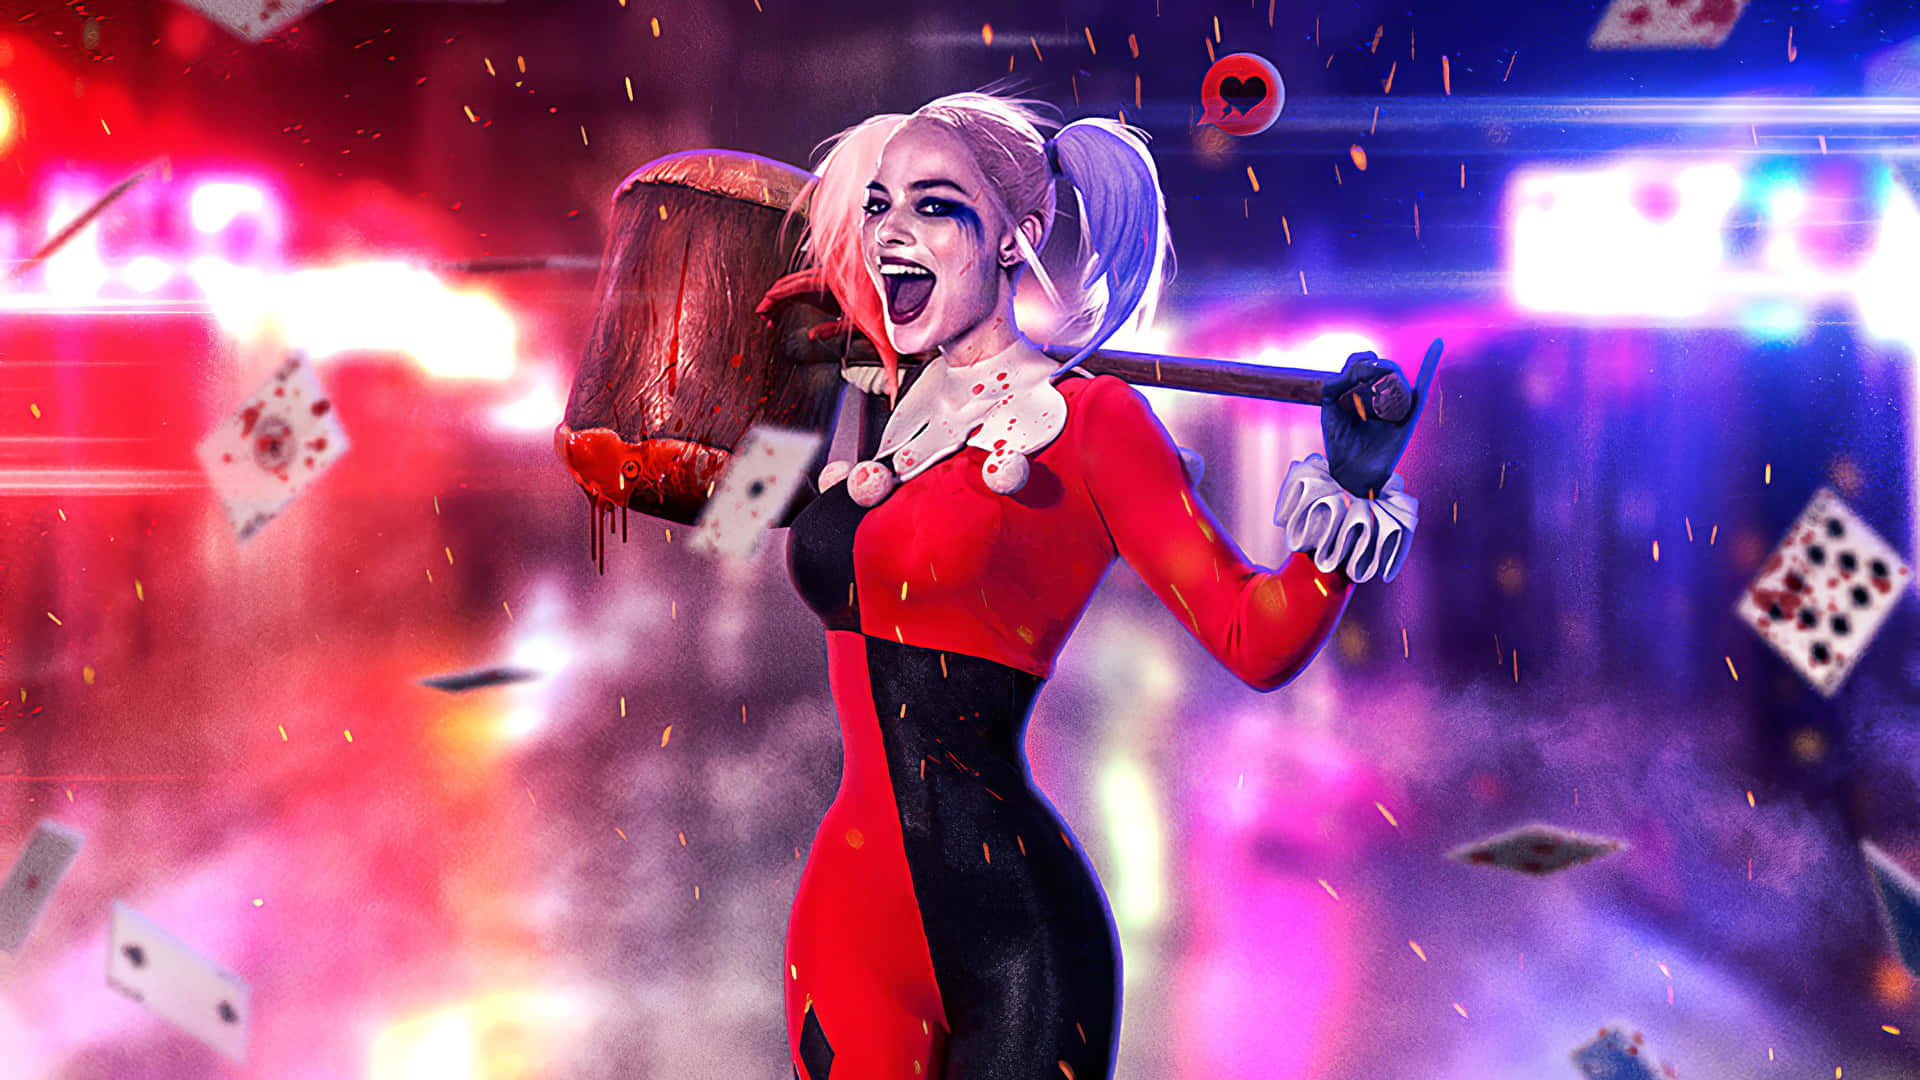 300+] Harley Quinn Background s for FREE 